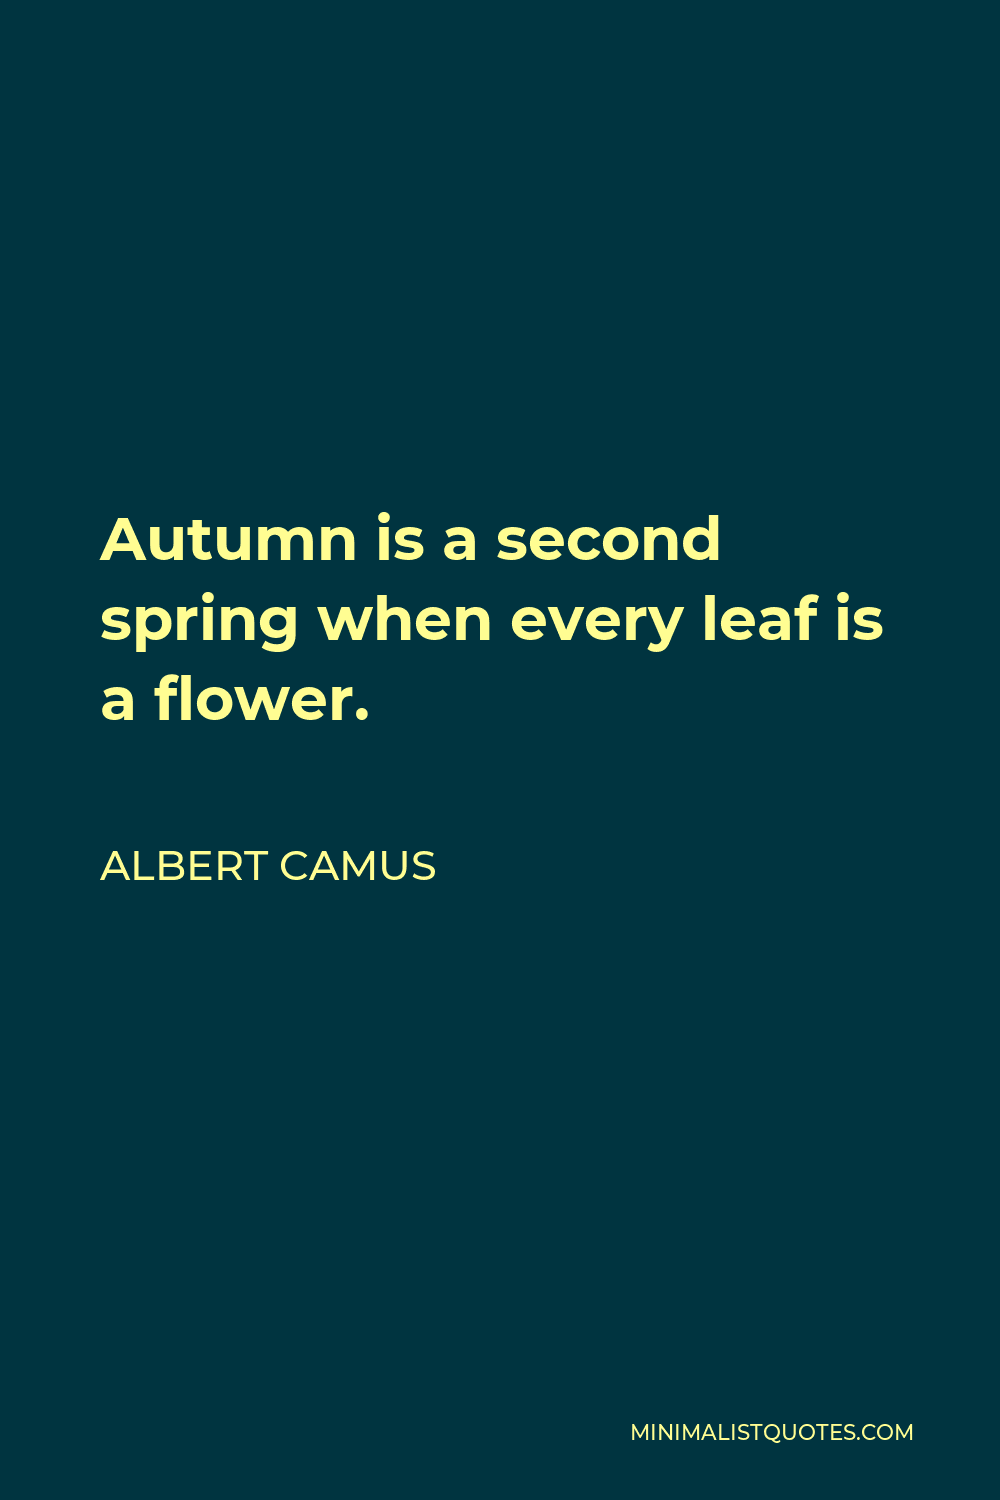 Albert Camus Quote: Autumn is a second spring when every leaf is a flower.